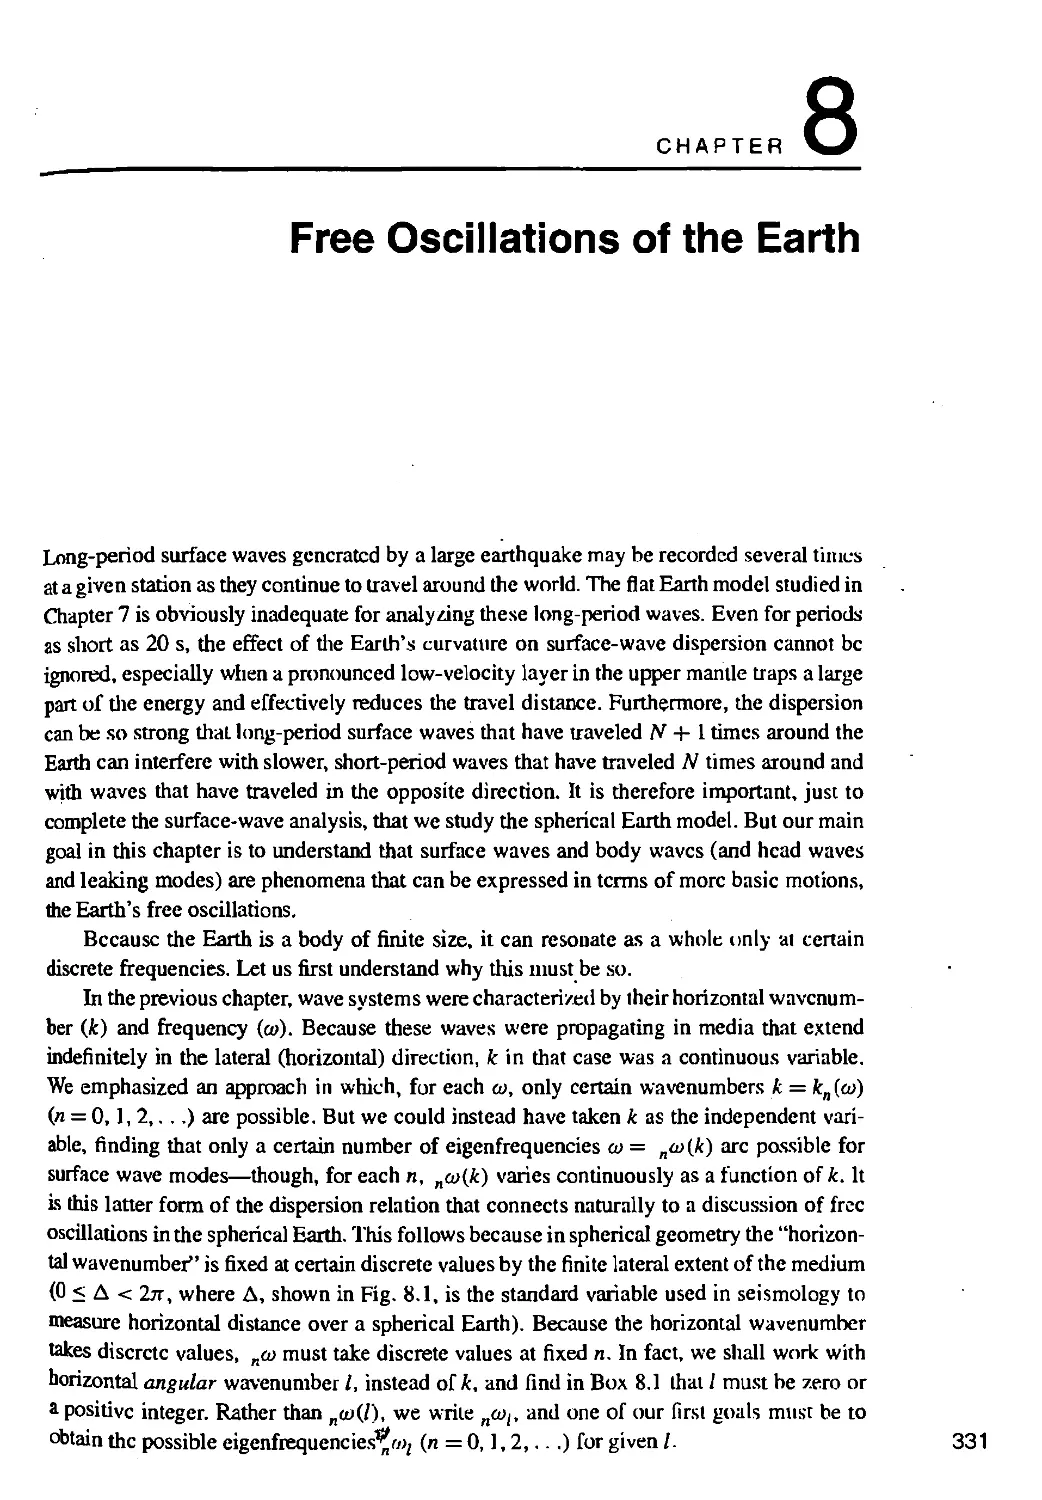 8. FREE OSCILLATIONS OF THE EARTH